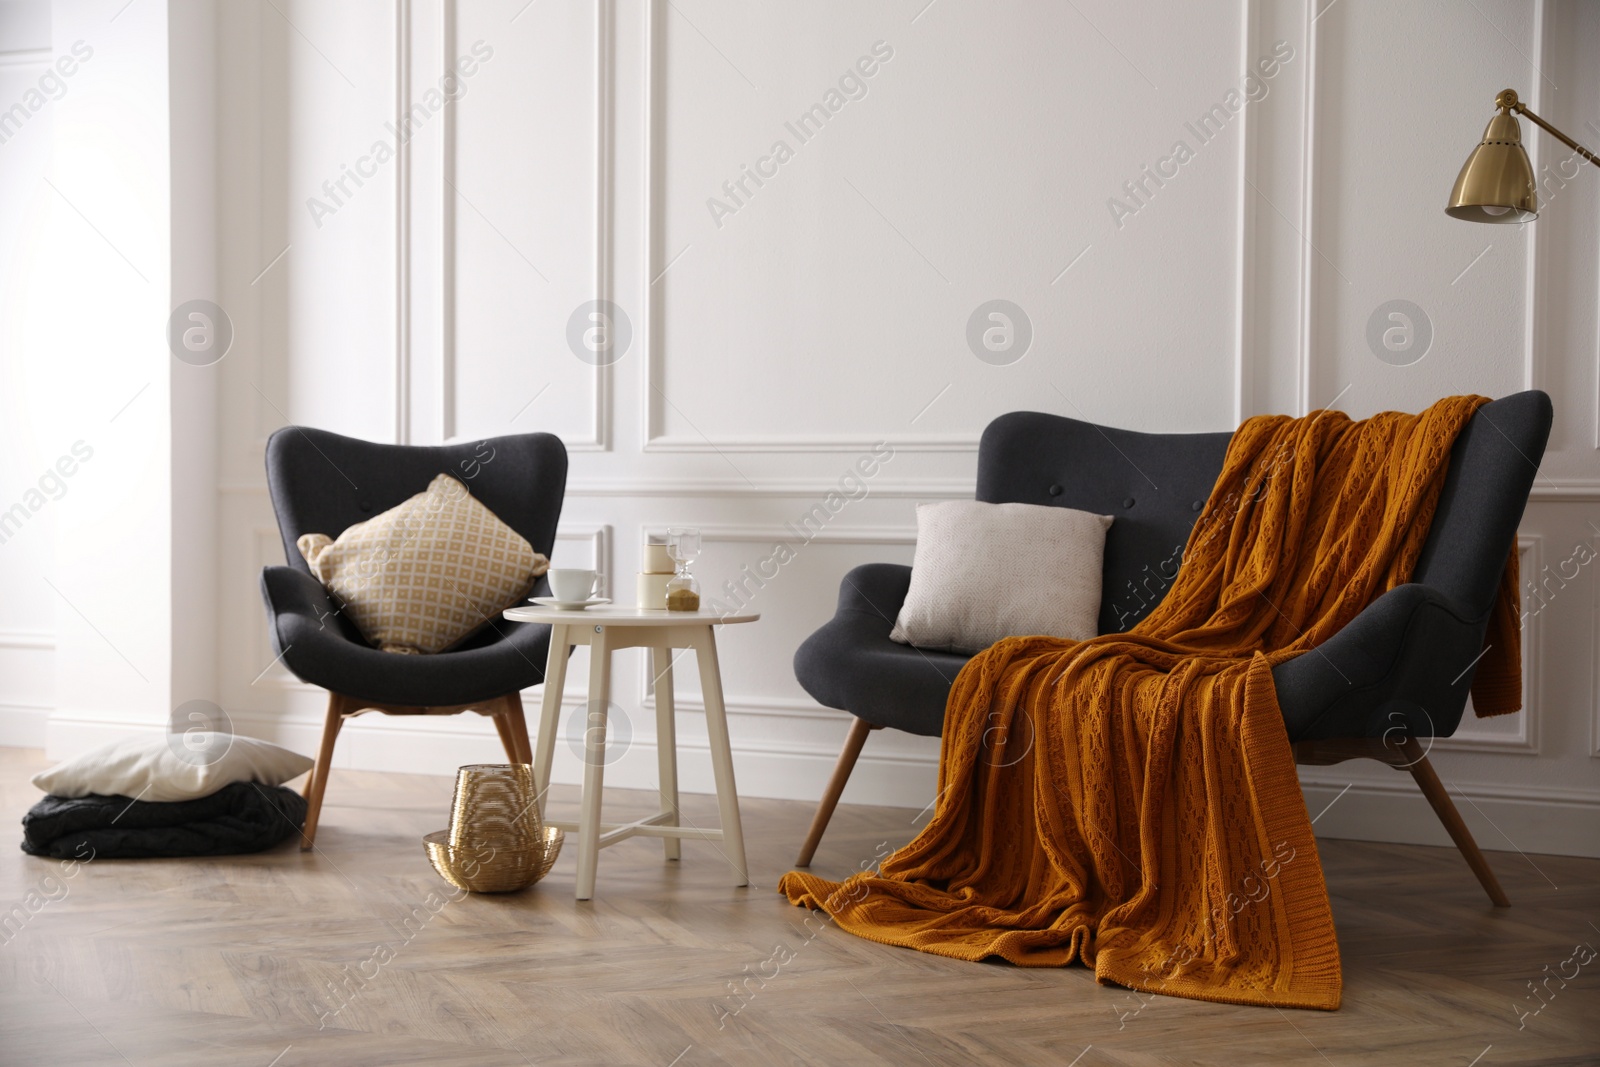 Photo of Comfortable sofa with knitted blanket, armchair and coffee table in stylish room interior